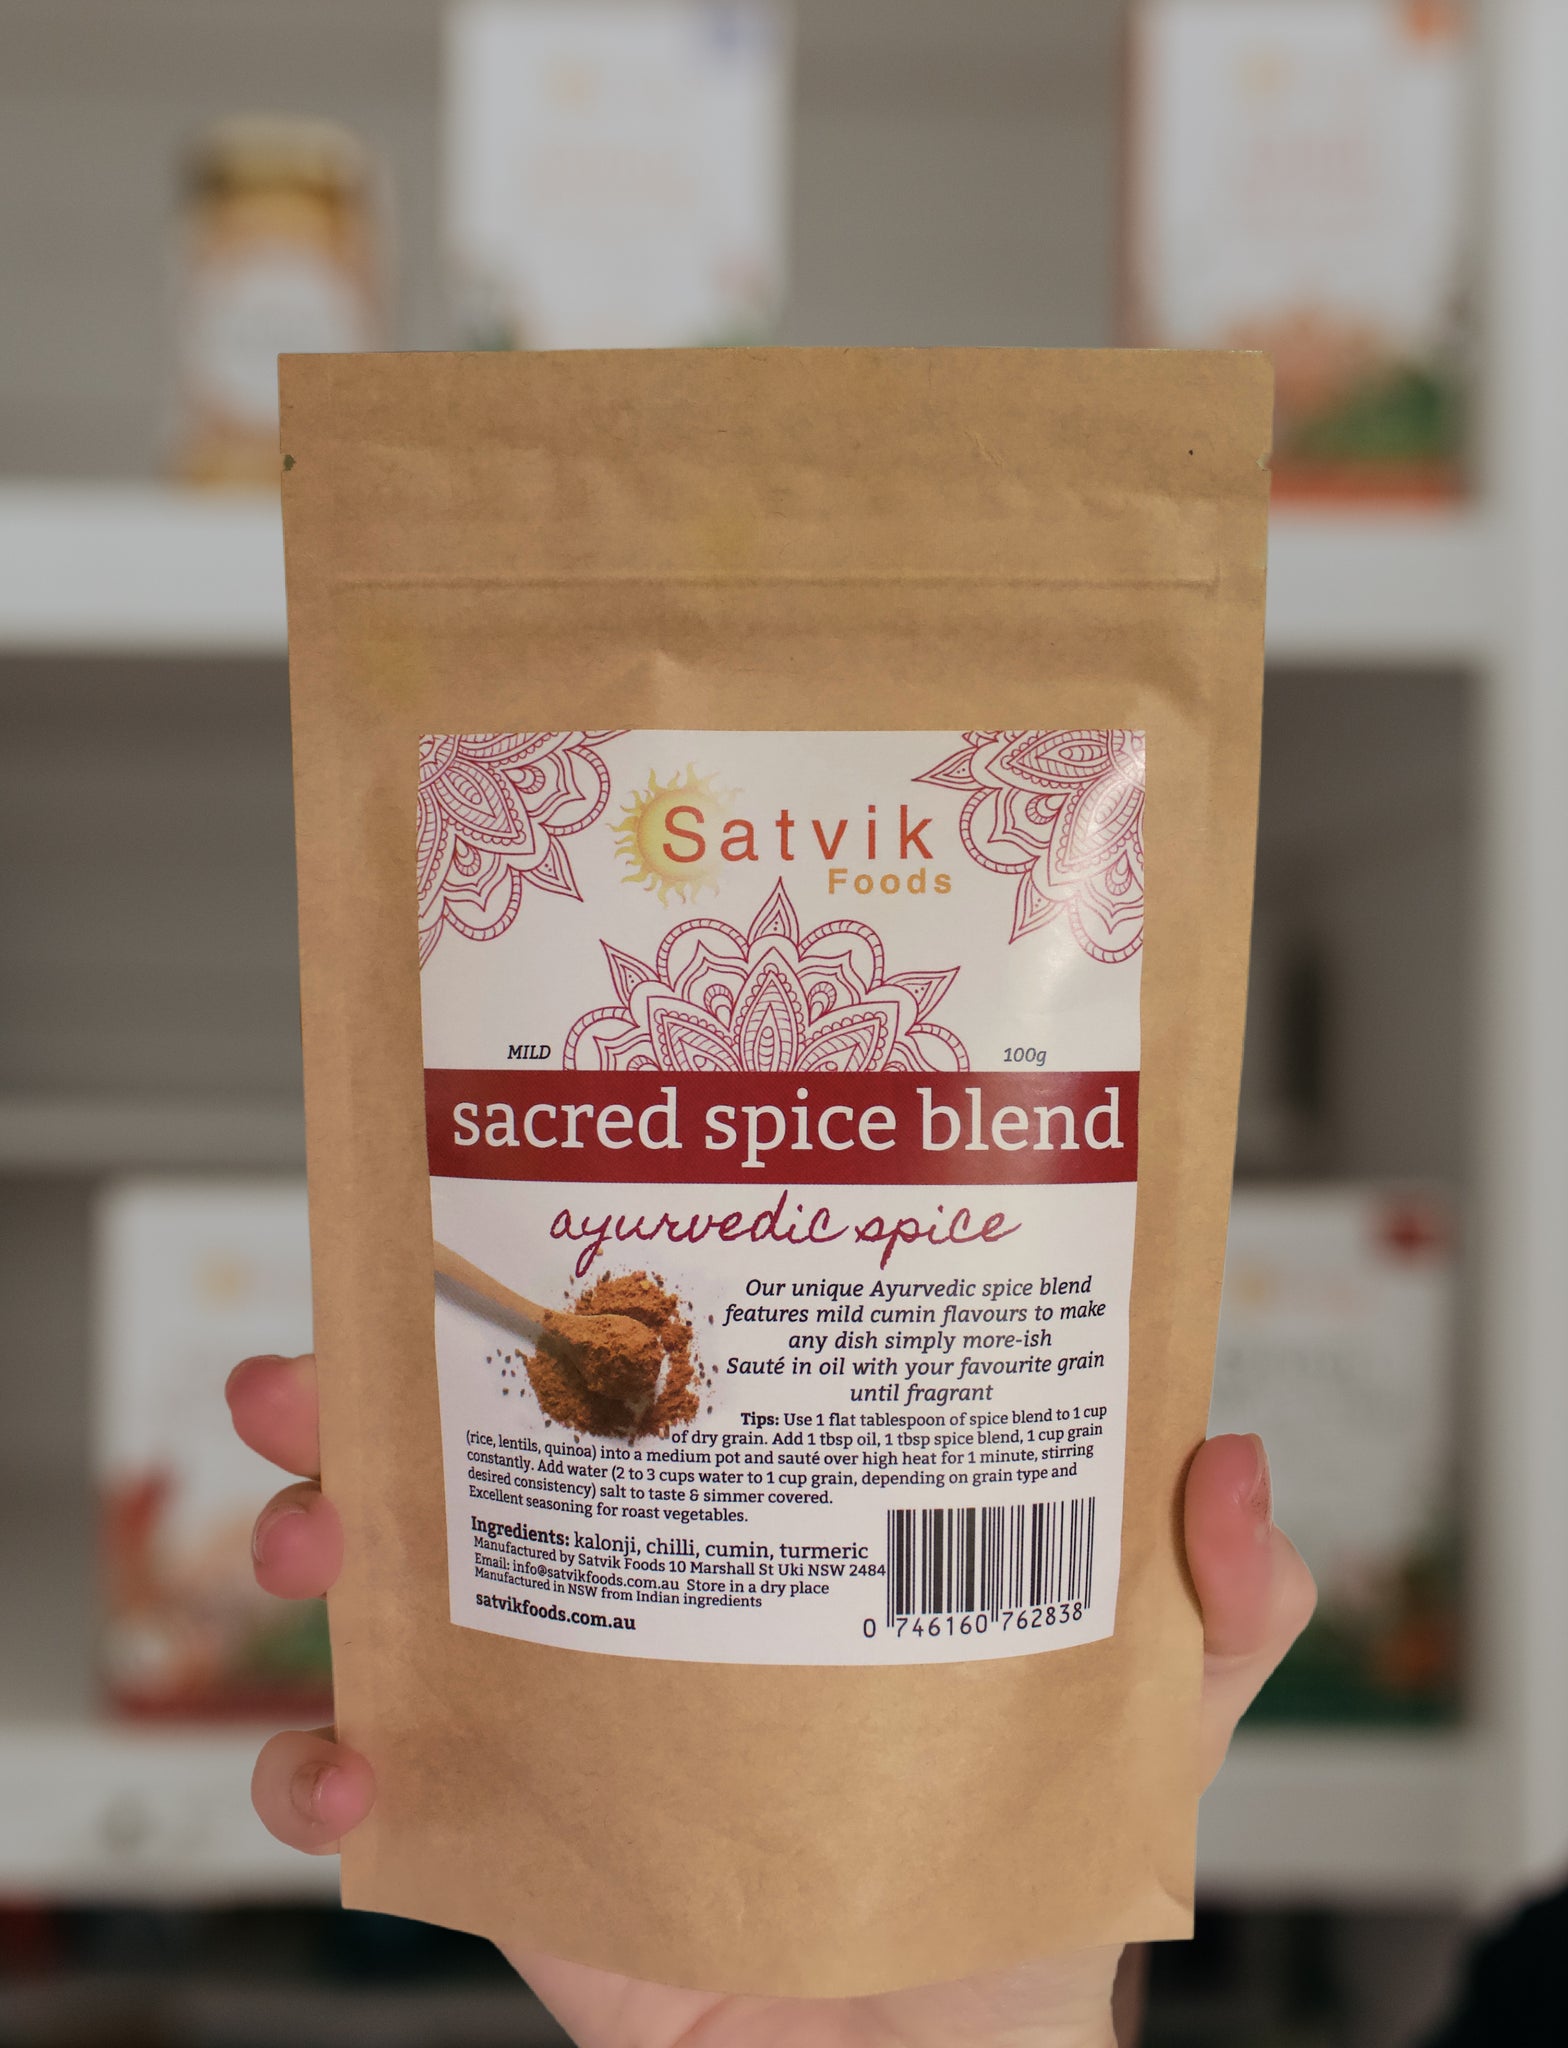 The Satvik Foods Sacred Spice Blend is a flavorful and aromatic blend of spices that can be used in a variety of recipes. The product is made with organic, non-GMO ingredients and a blend of warming spices, including traditional Ayurvedic spices.